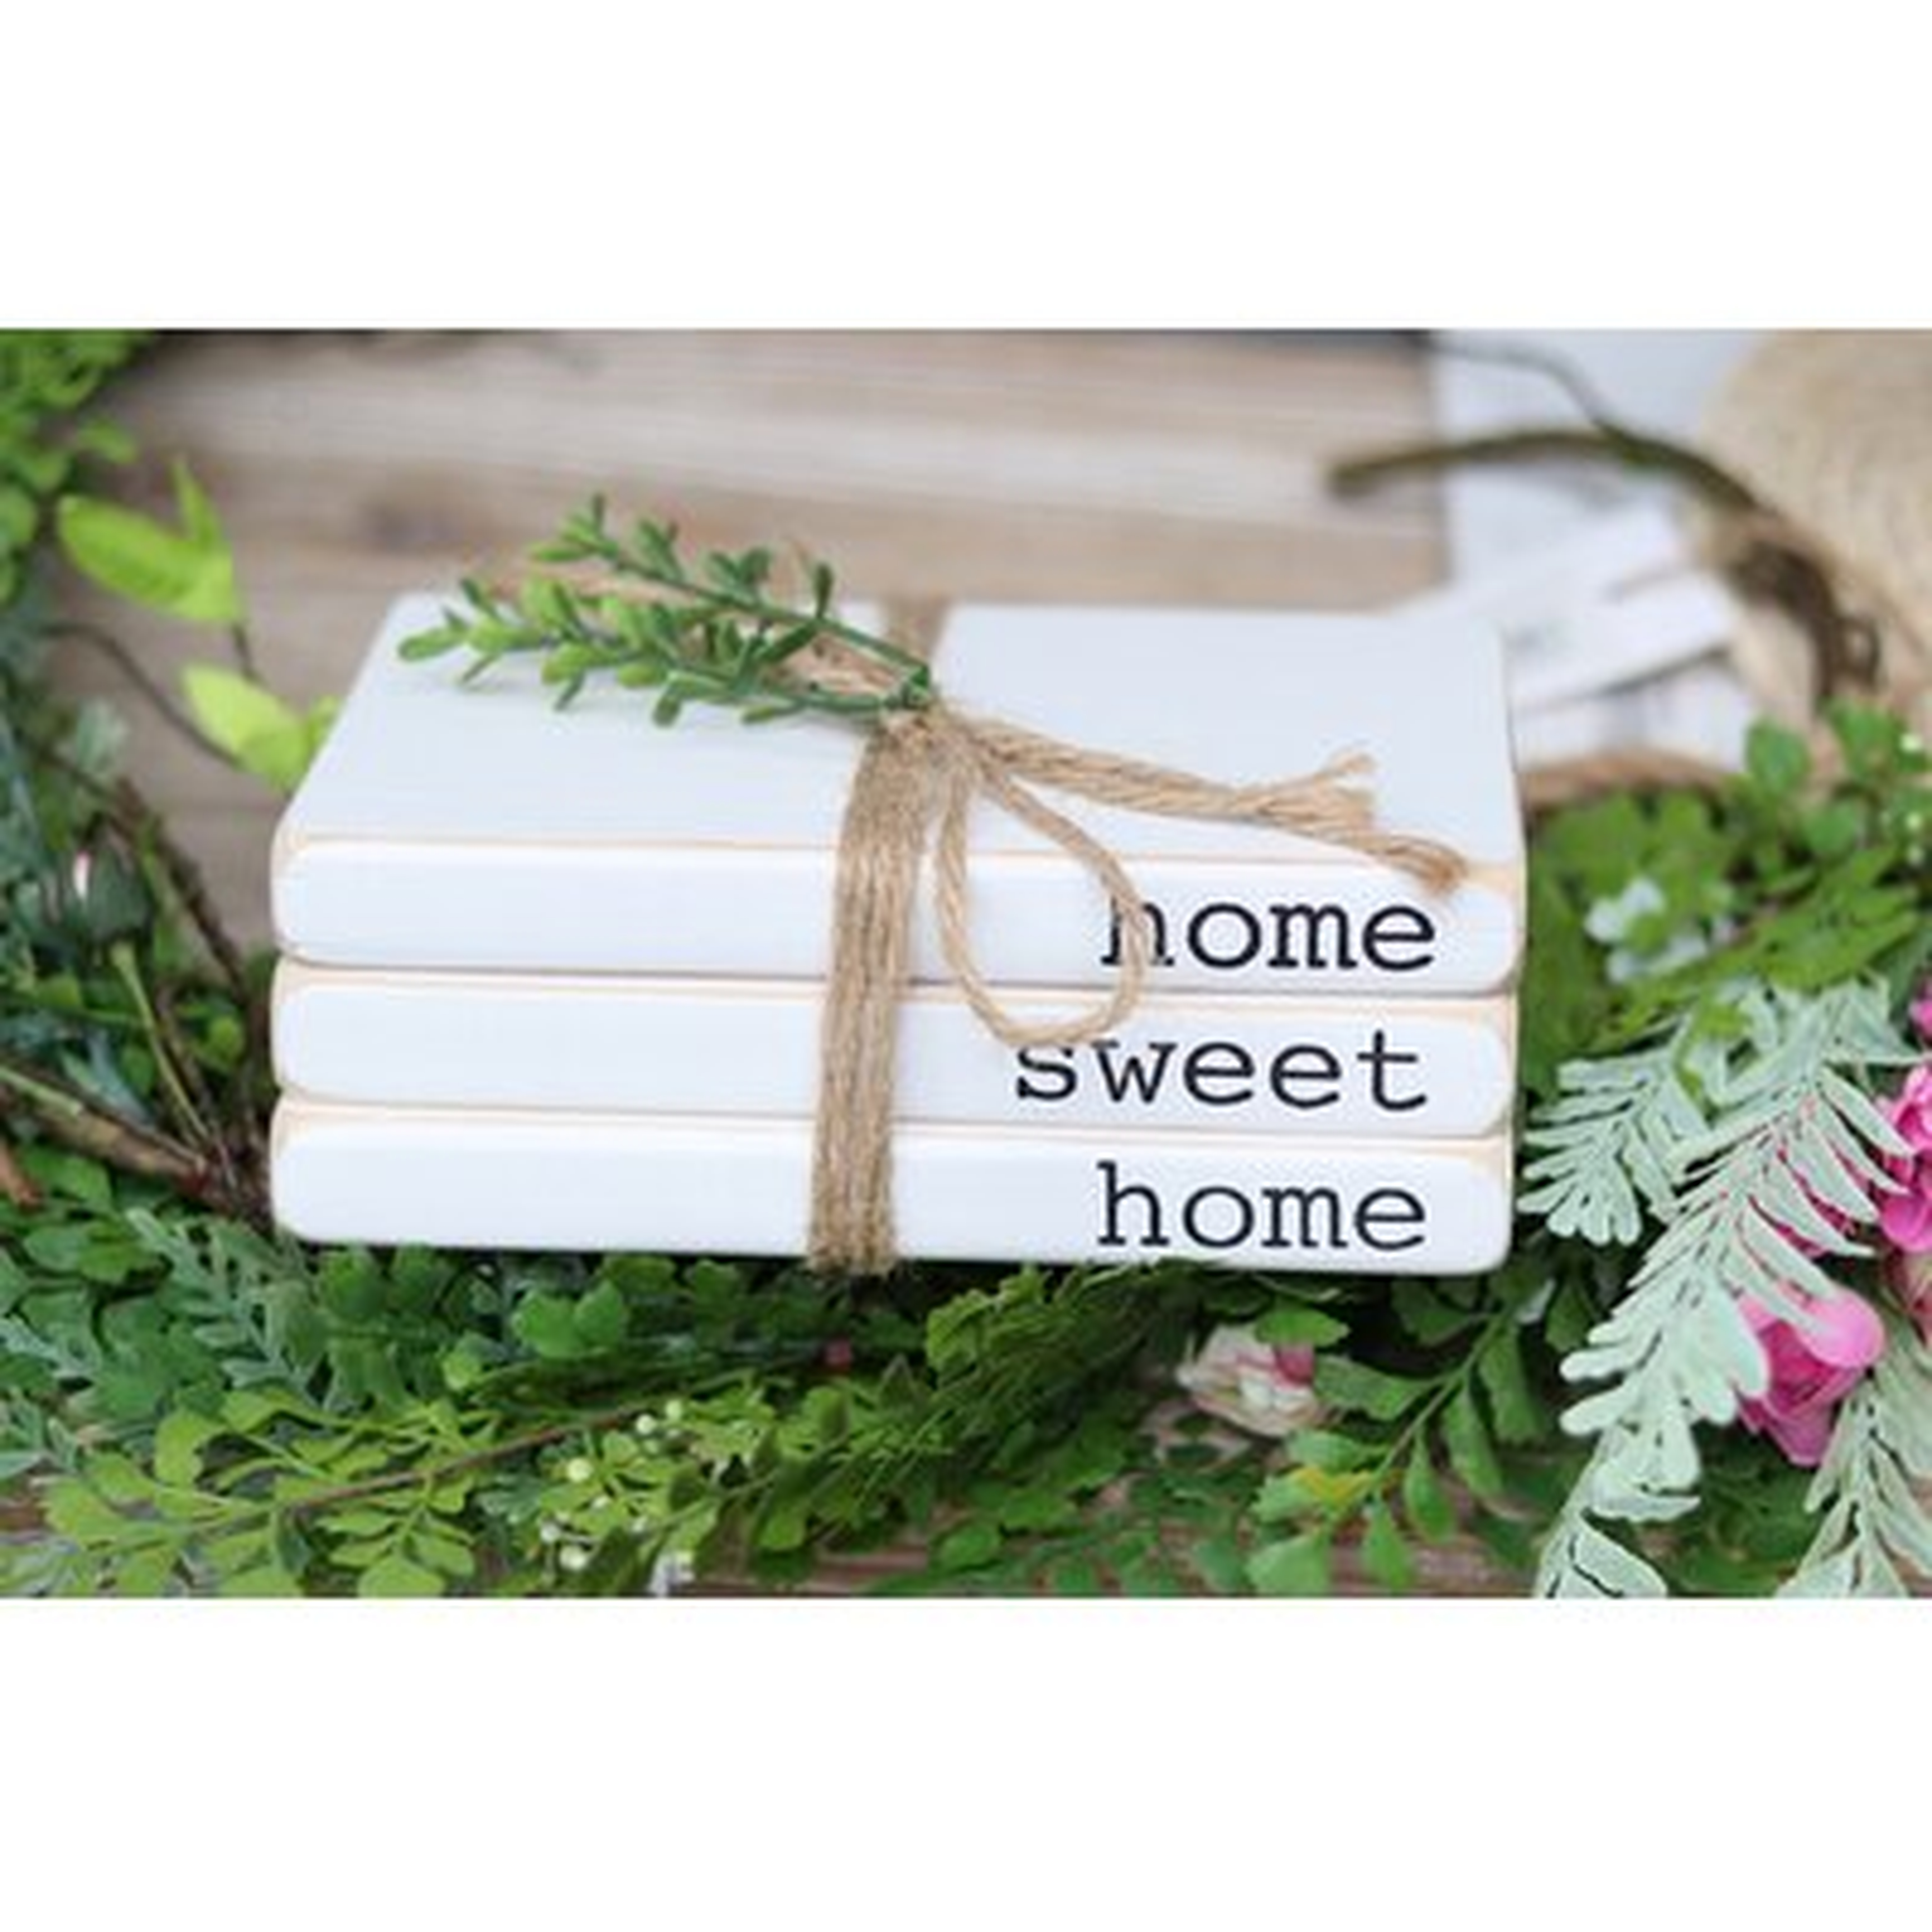 Gainz Home Sweet Home Decorative Faux Wood Book with Leaves and Jute String - Wayfair